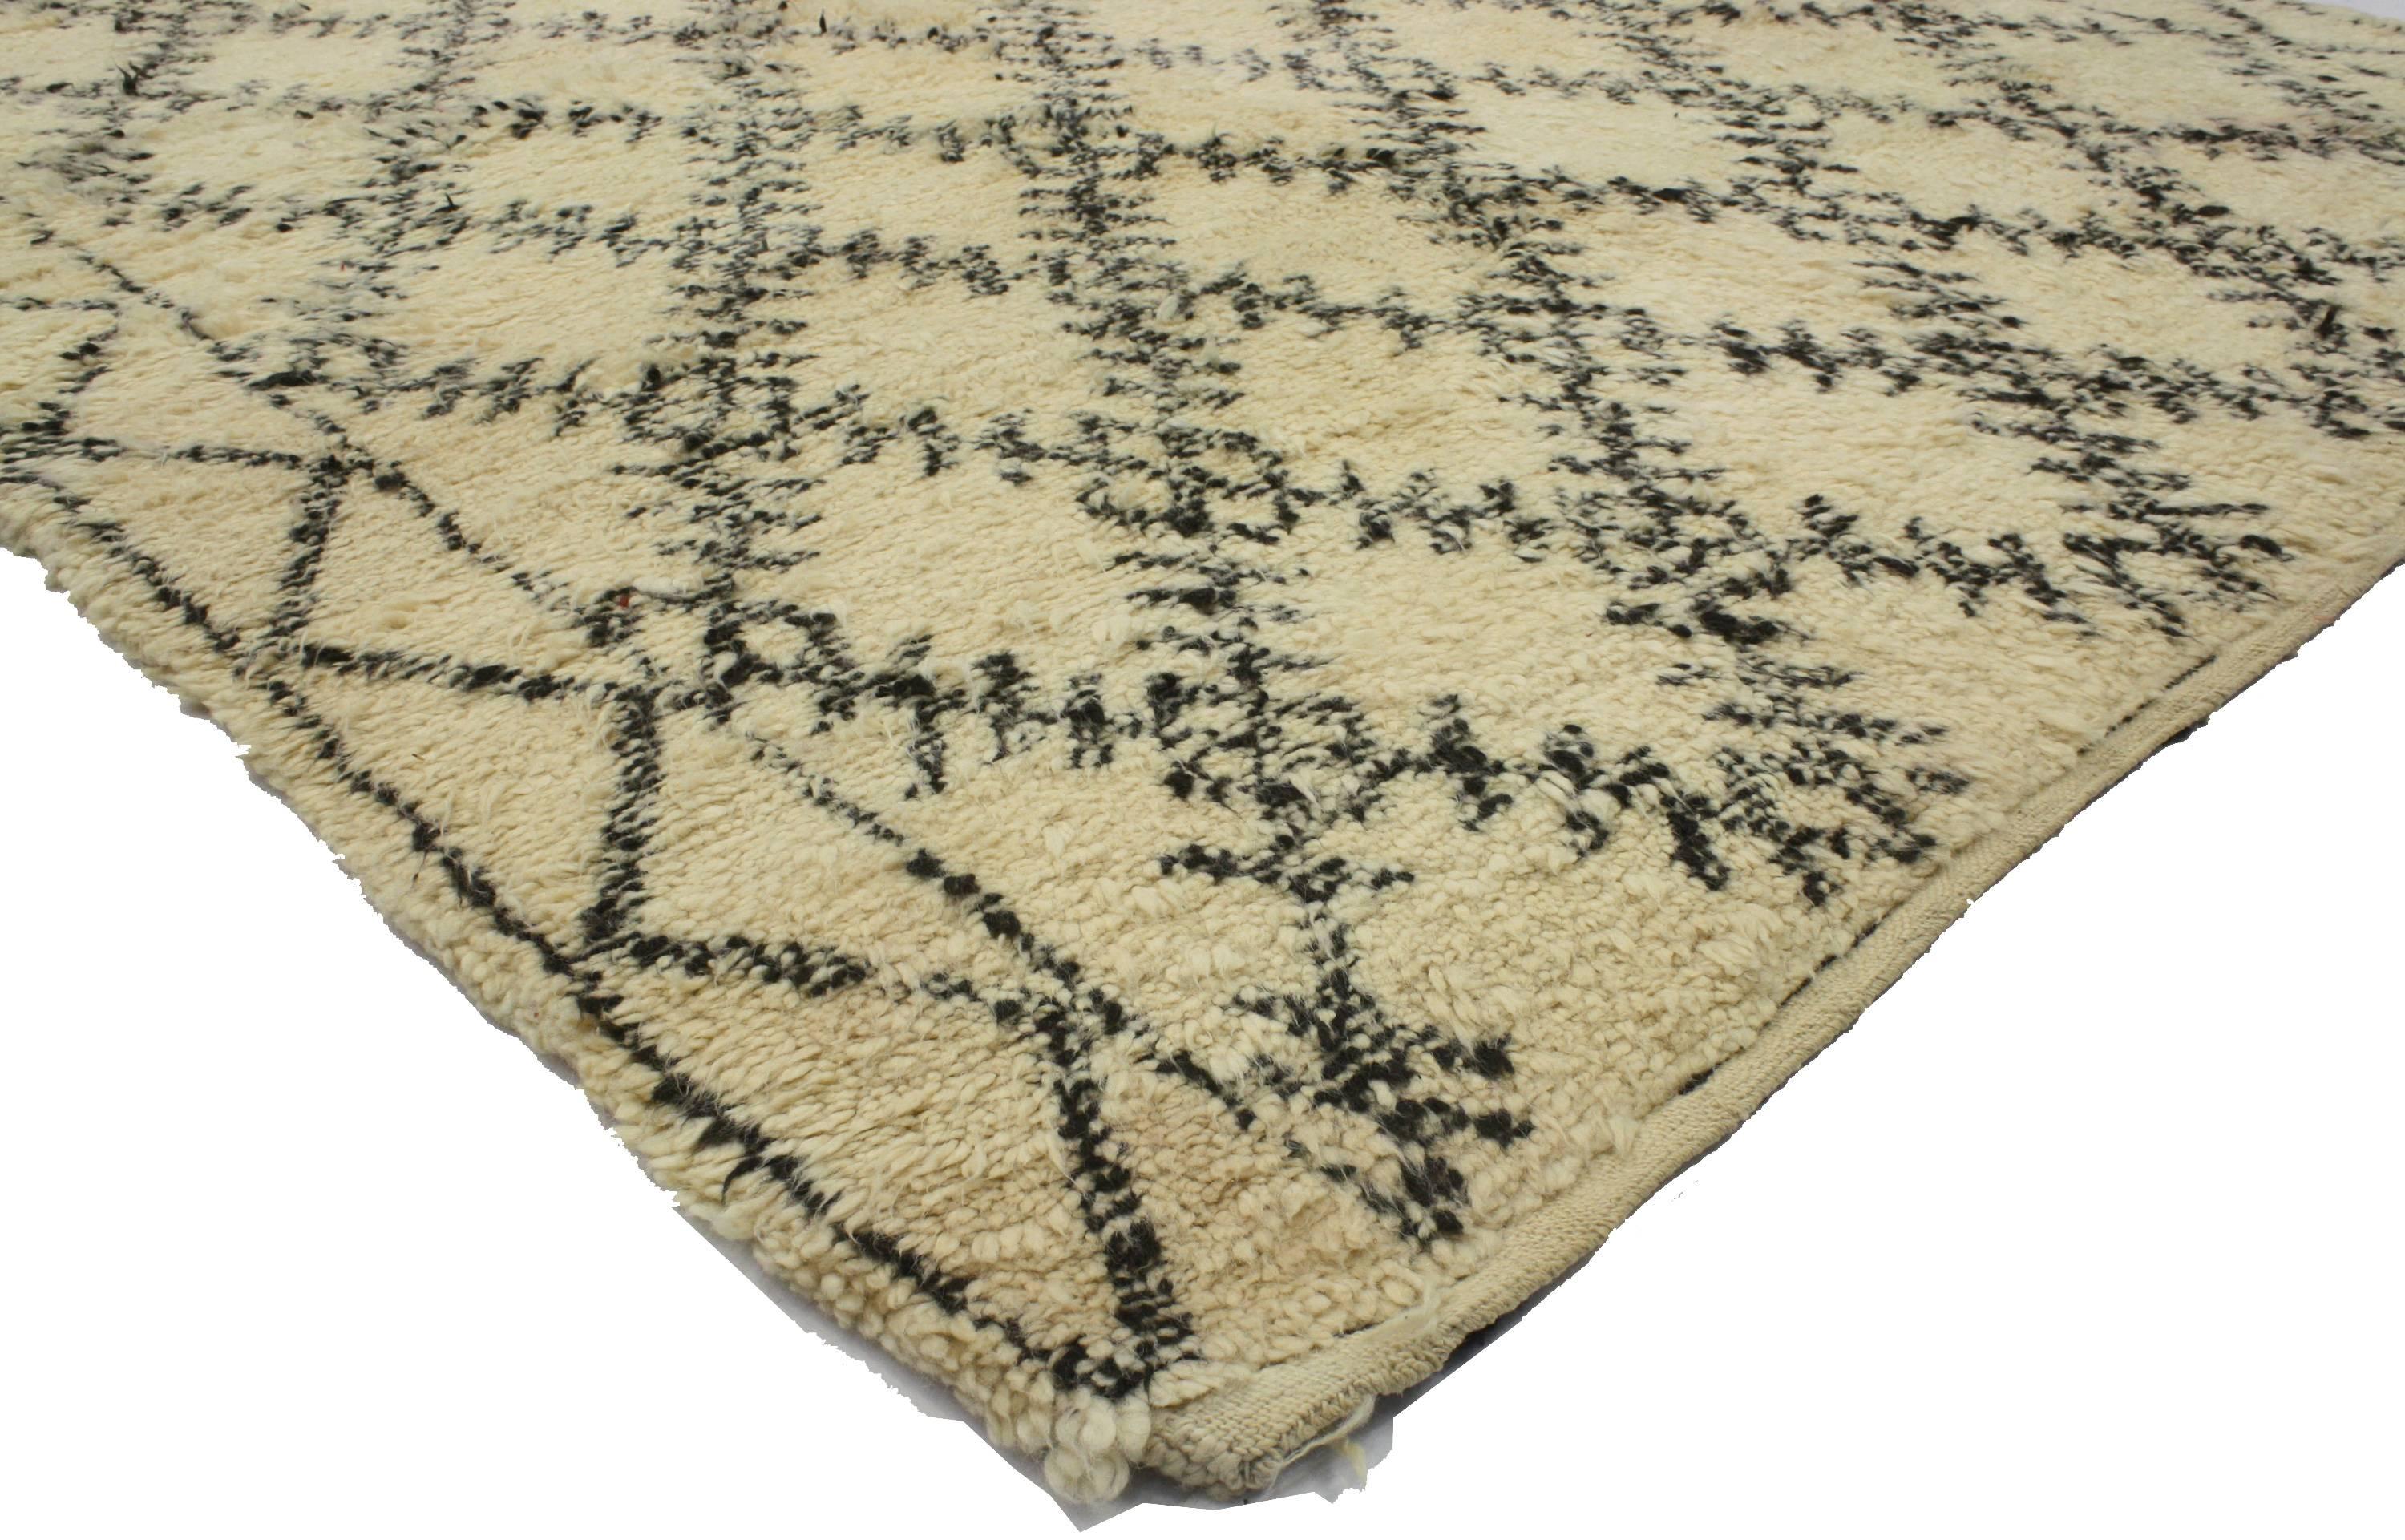 Hand-Knotted Vintage Beni Ourain Moroccan Rug with Modern Bauhaus Style, Beni Ouarain Rug